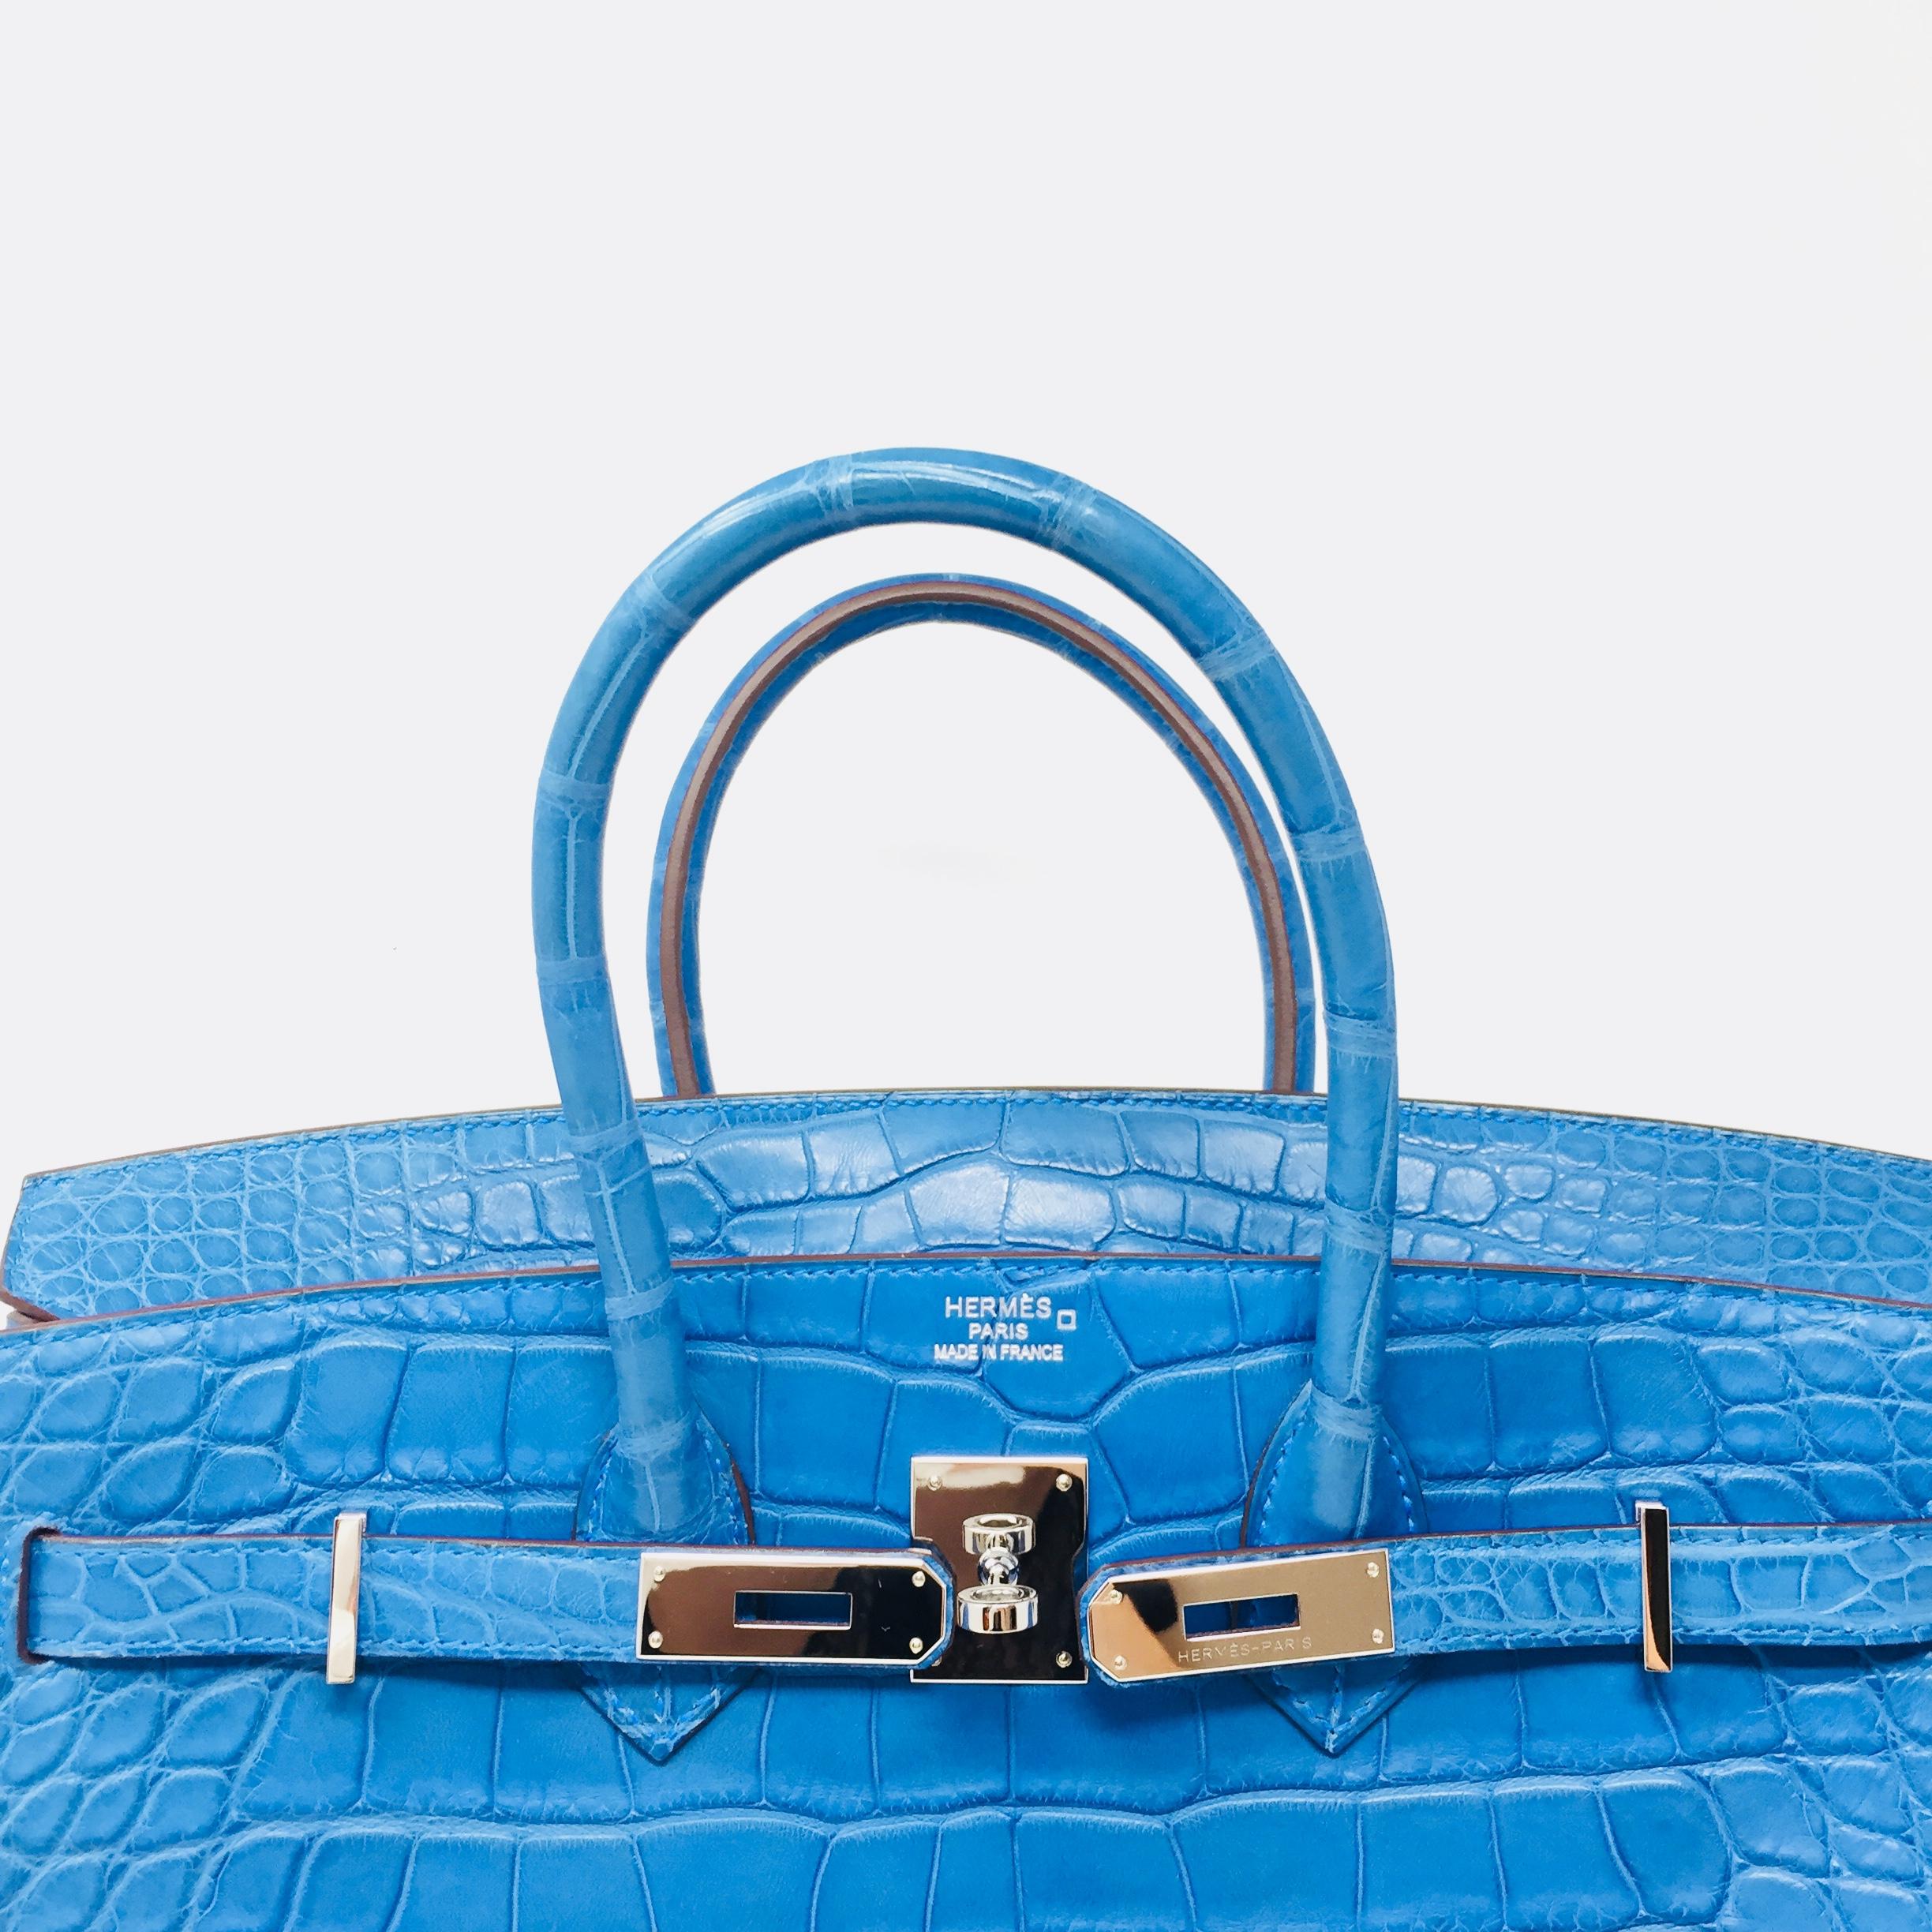 Enjoy Mykonos blue with this exclusive Hermes Bag, made of alligator leather that contributes to its luxurious design. The tone-on-tone Chevre Leather Inside. The bag is an amazing and Rare piece of 2012 in the exotic alligator leather of the